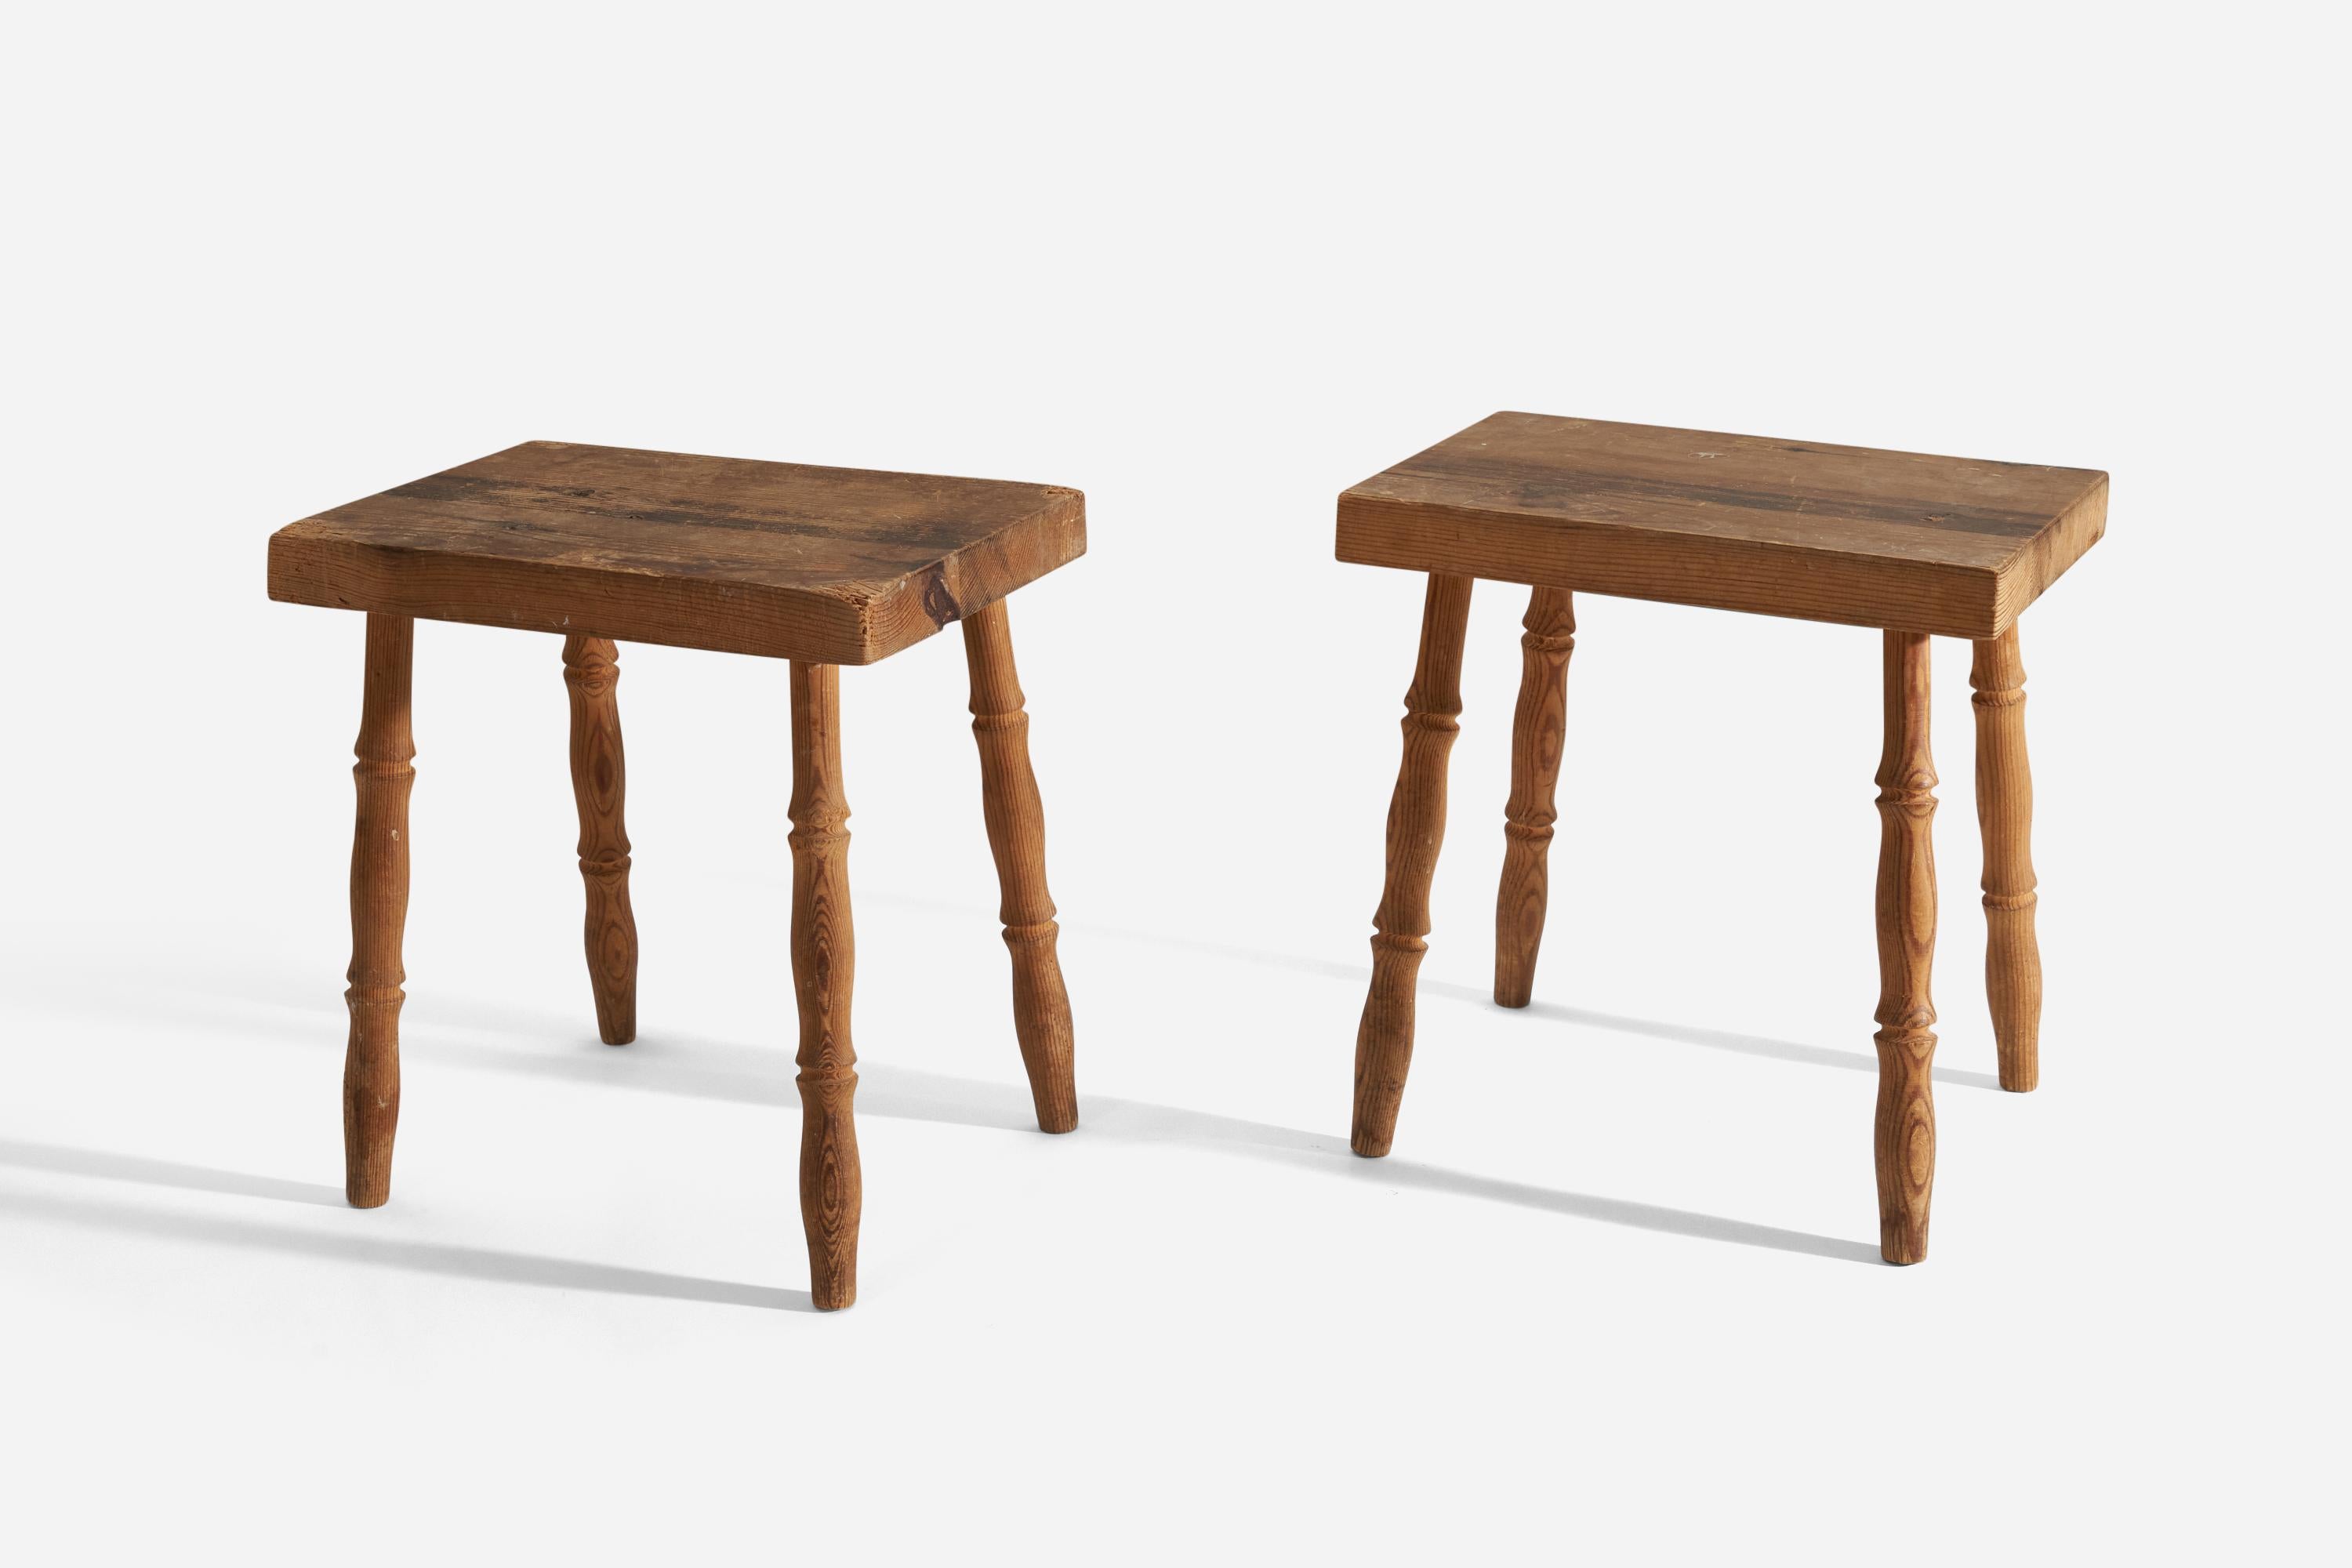 A pair of solid pine stools, designed and produced in Sweden, 1940s.